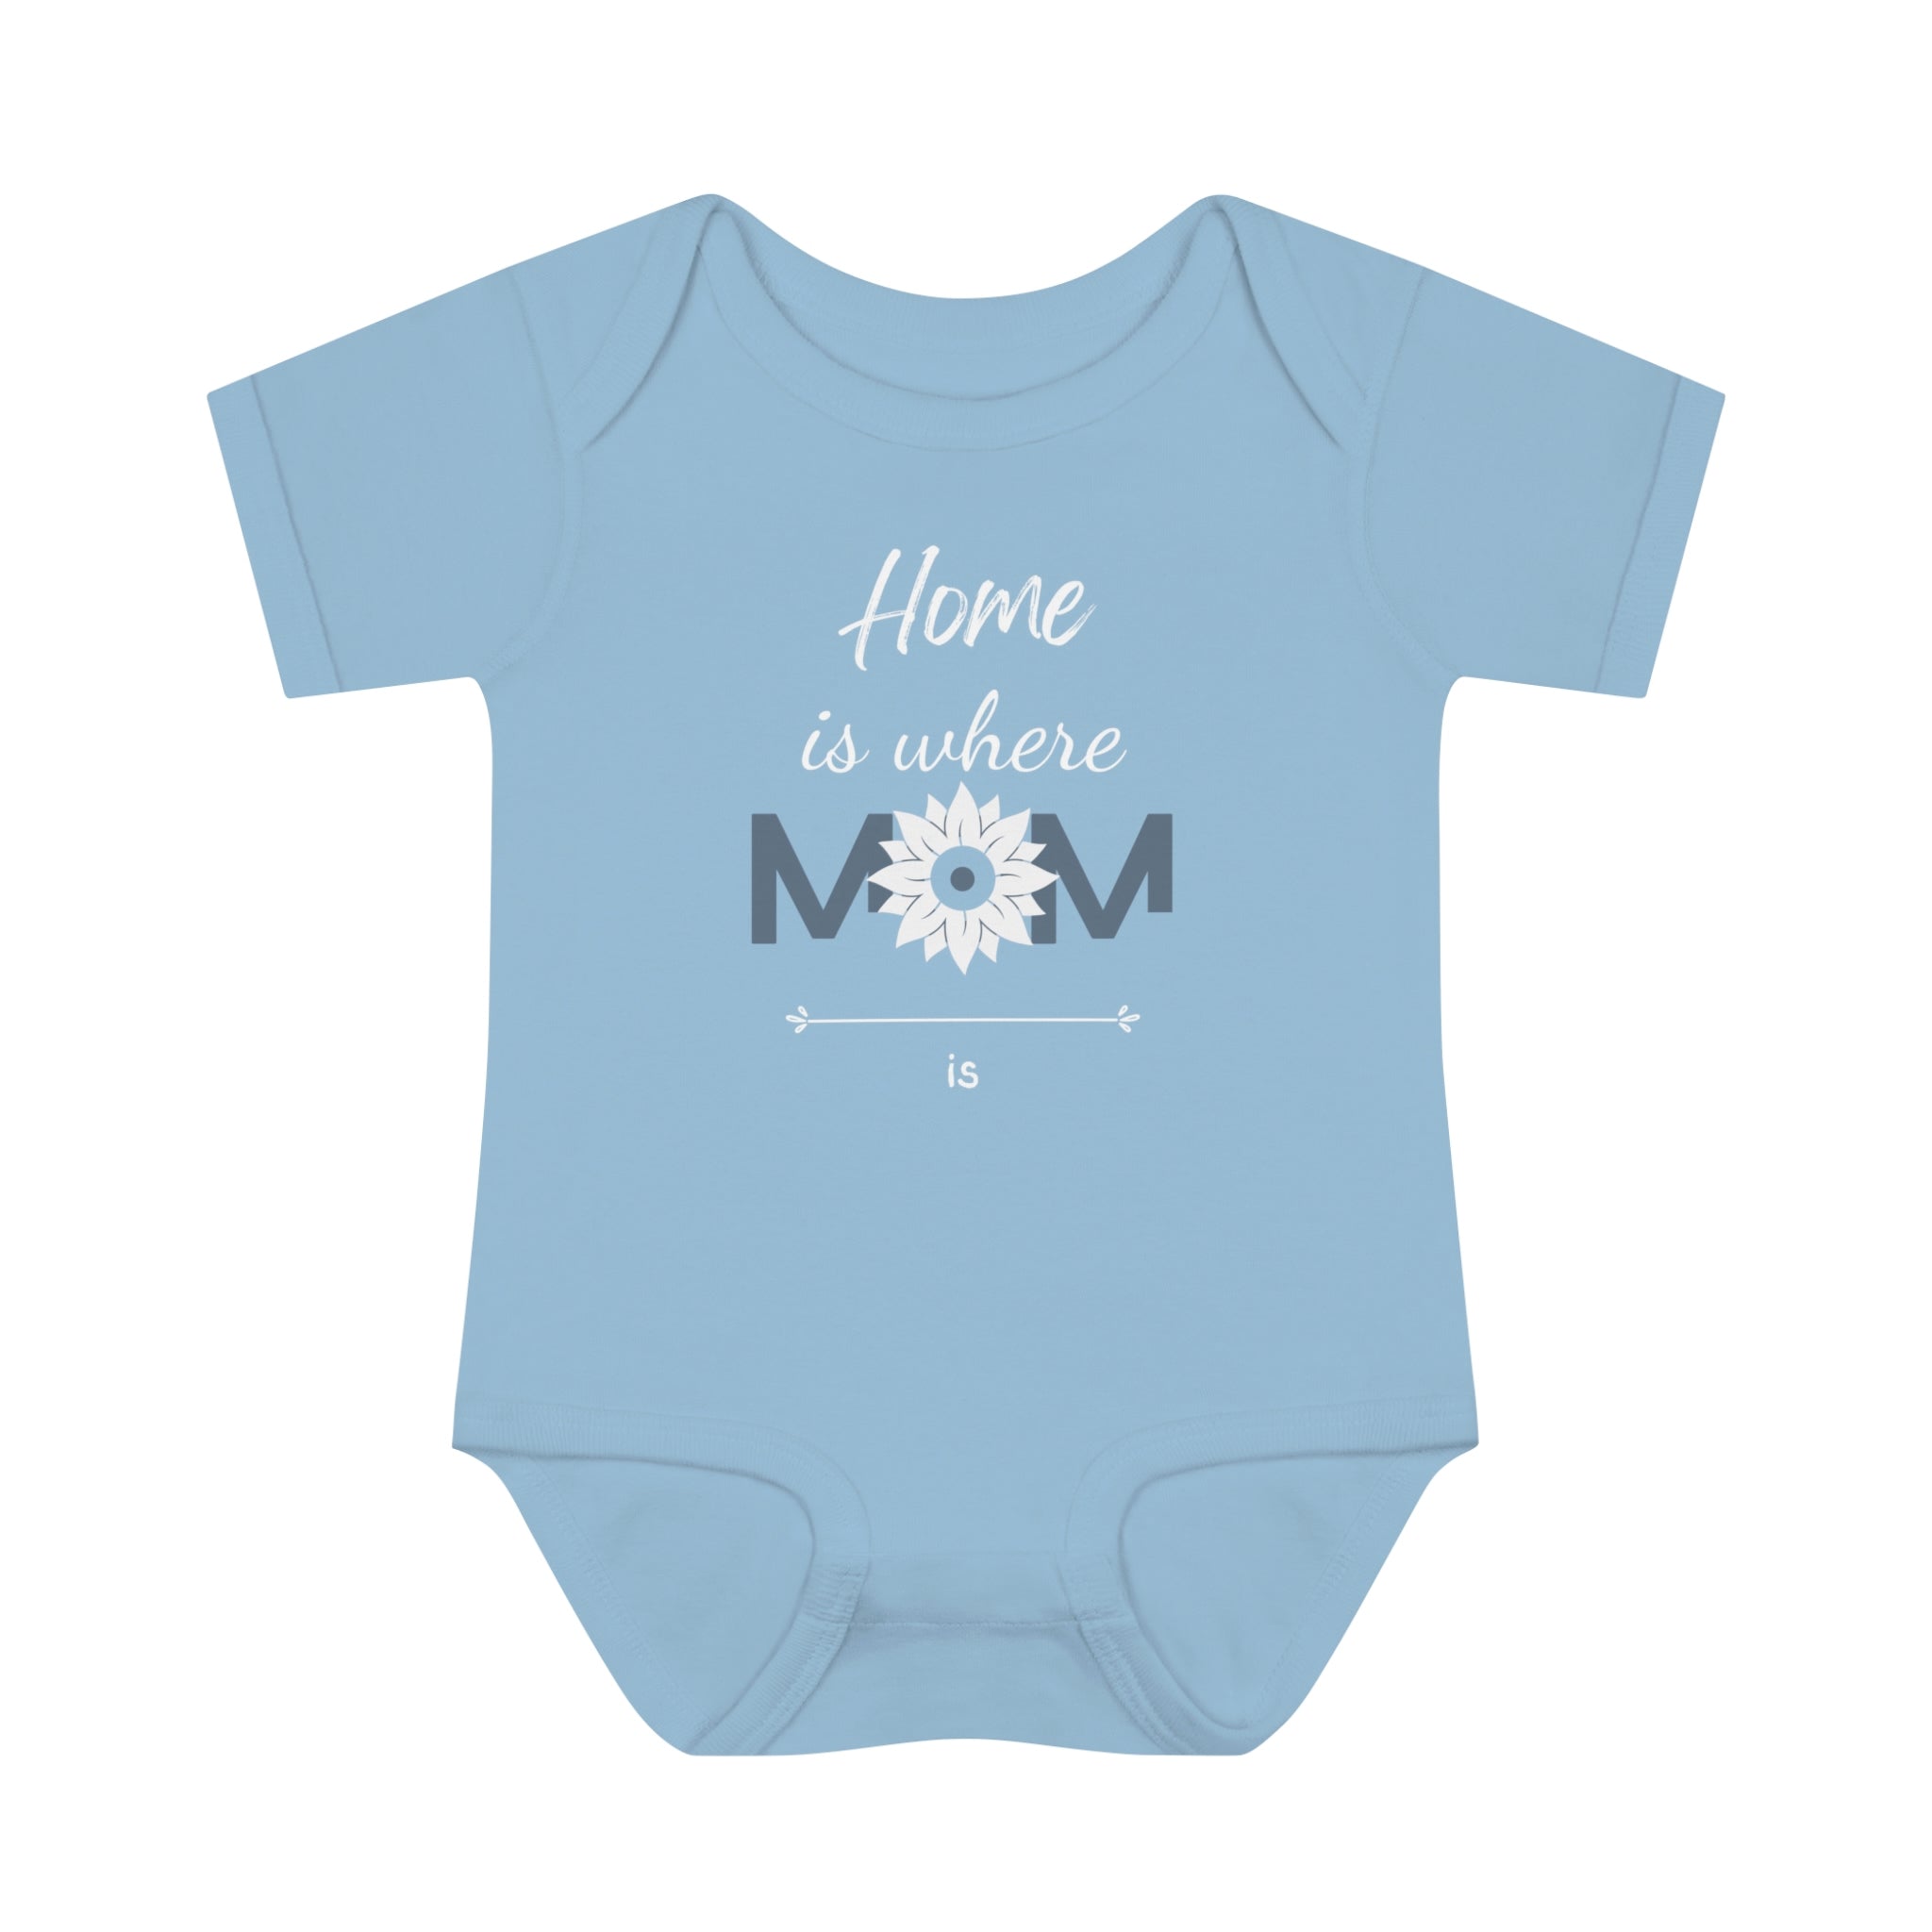 Home Is Where Mom Is Design Baby Bodysuit